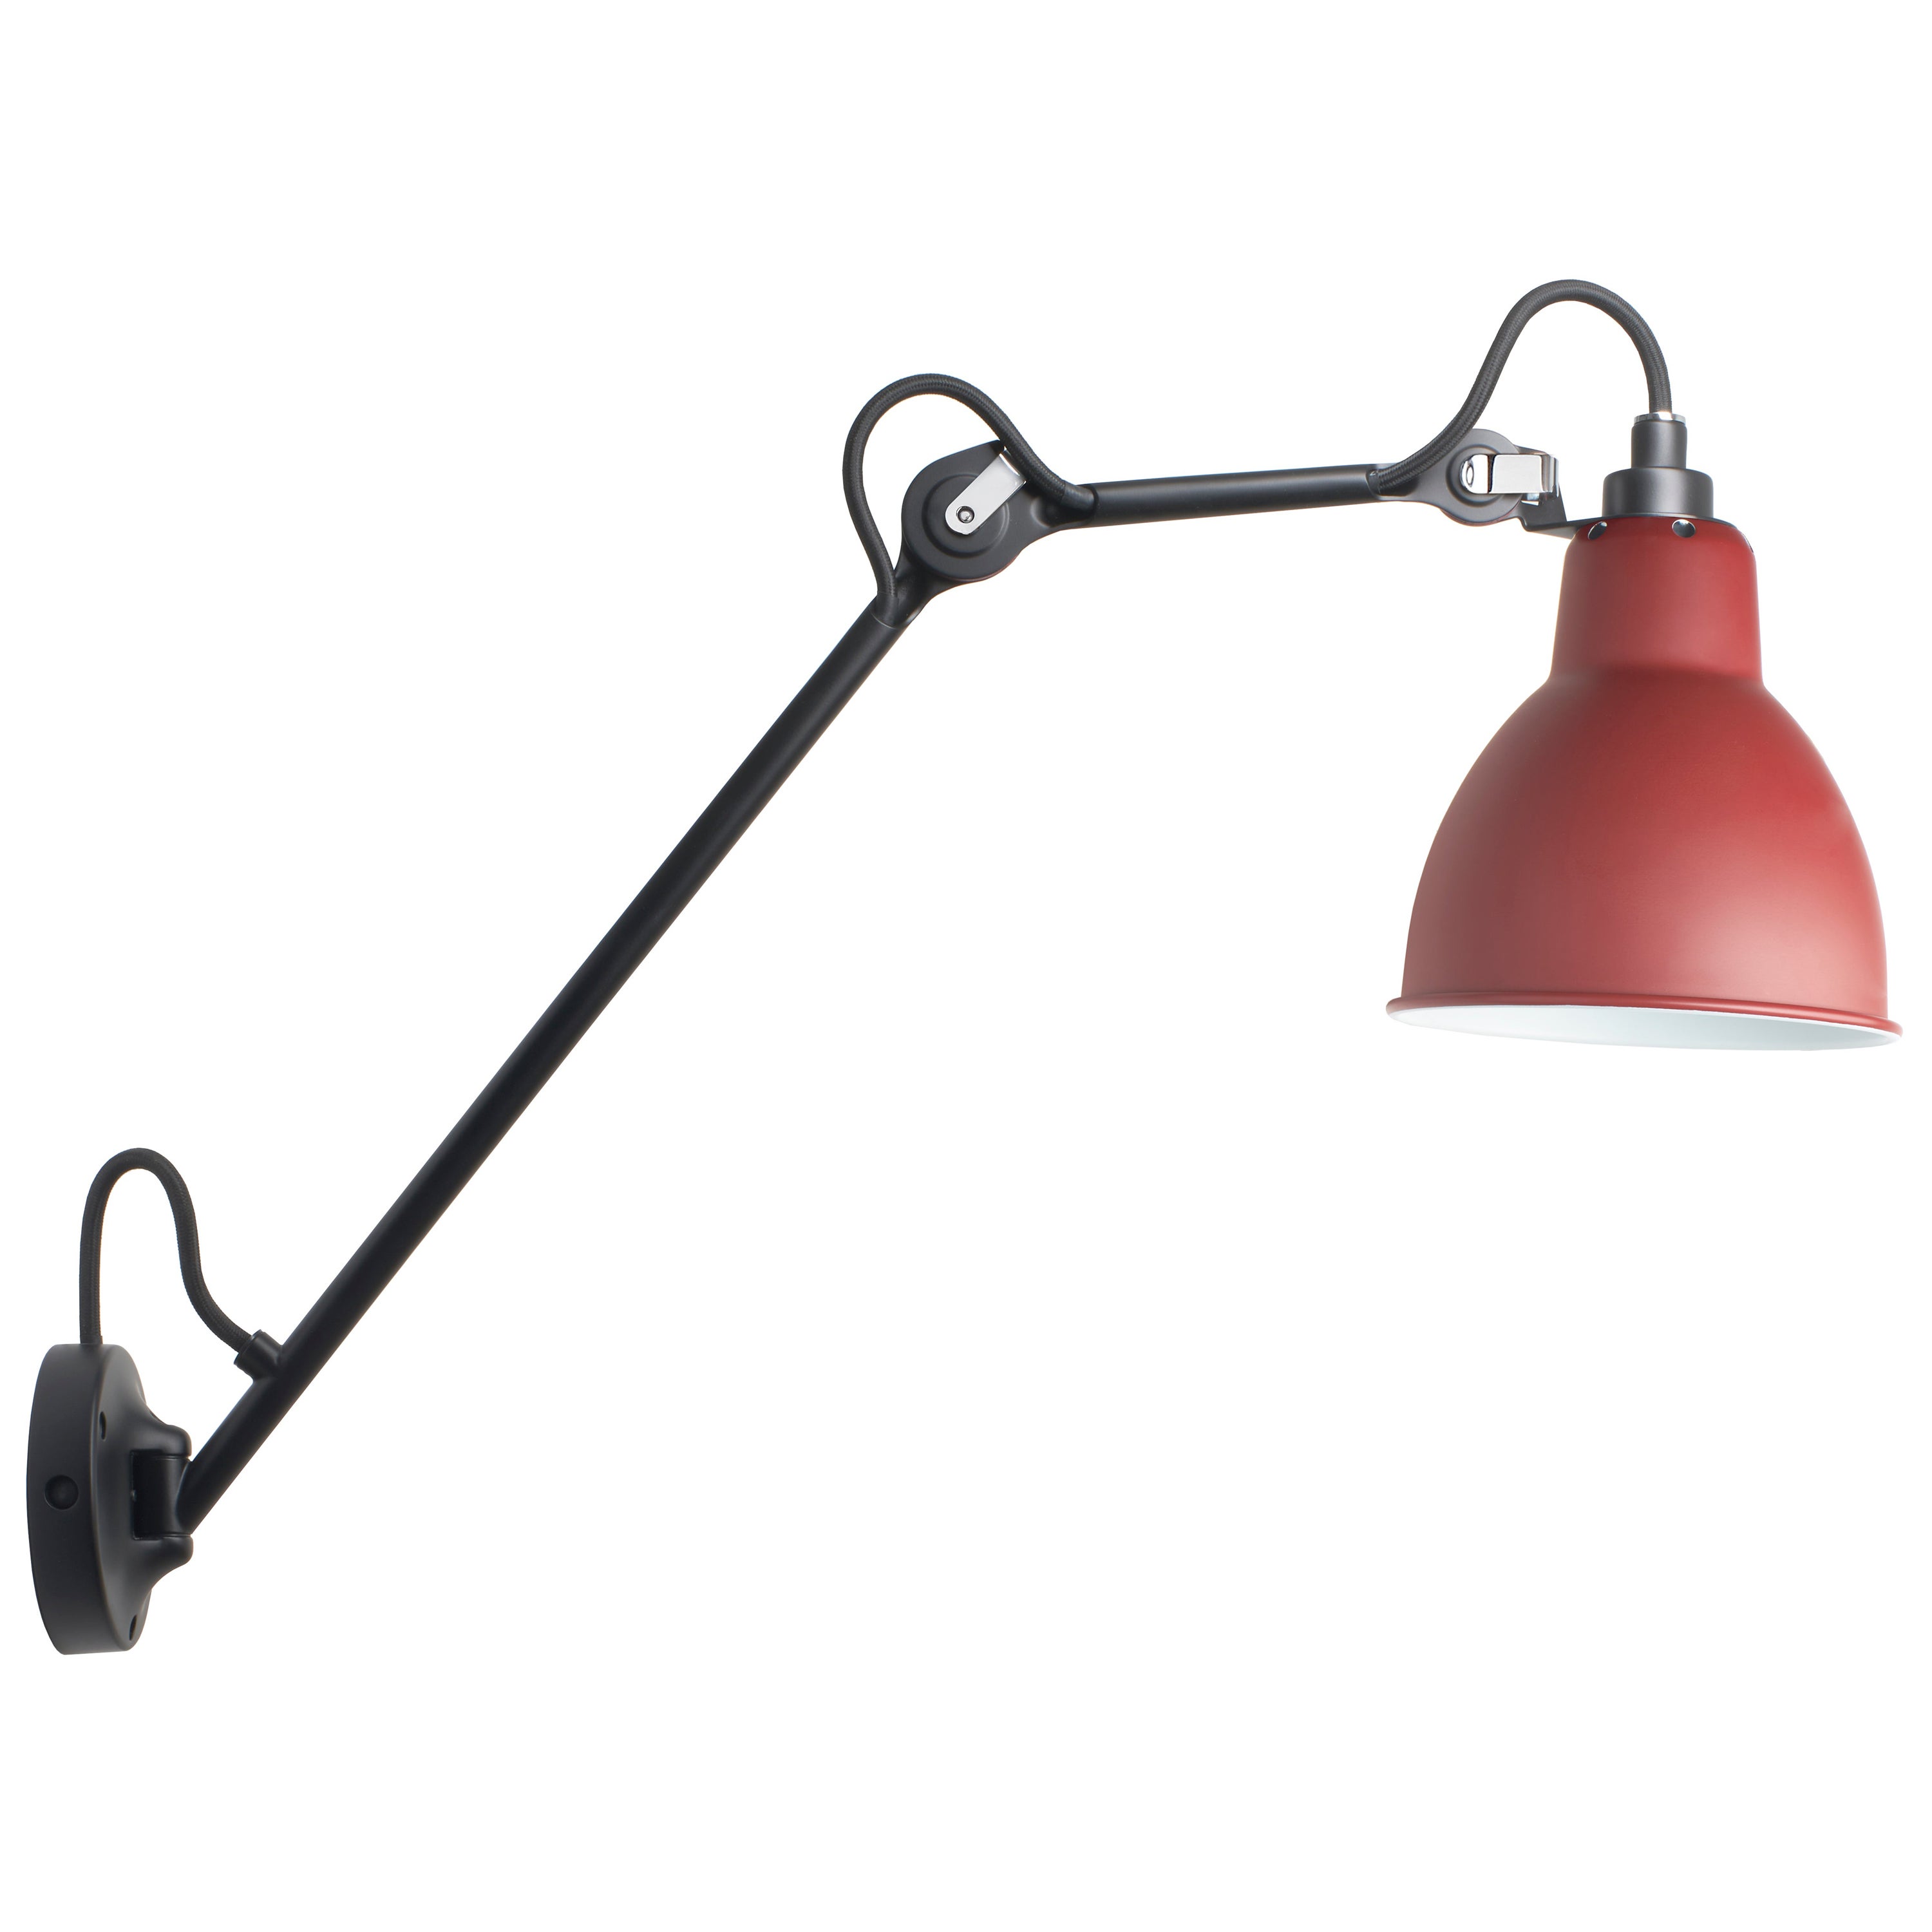 DCW Editions La Lampe Gras N°122 Wall Lamp in Black Arm and Red Shade